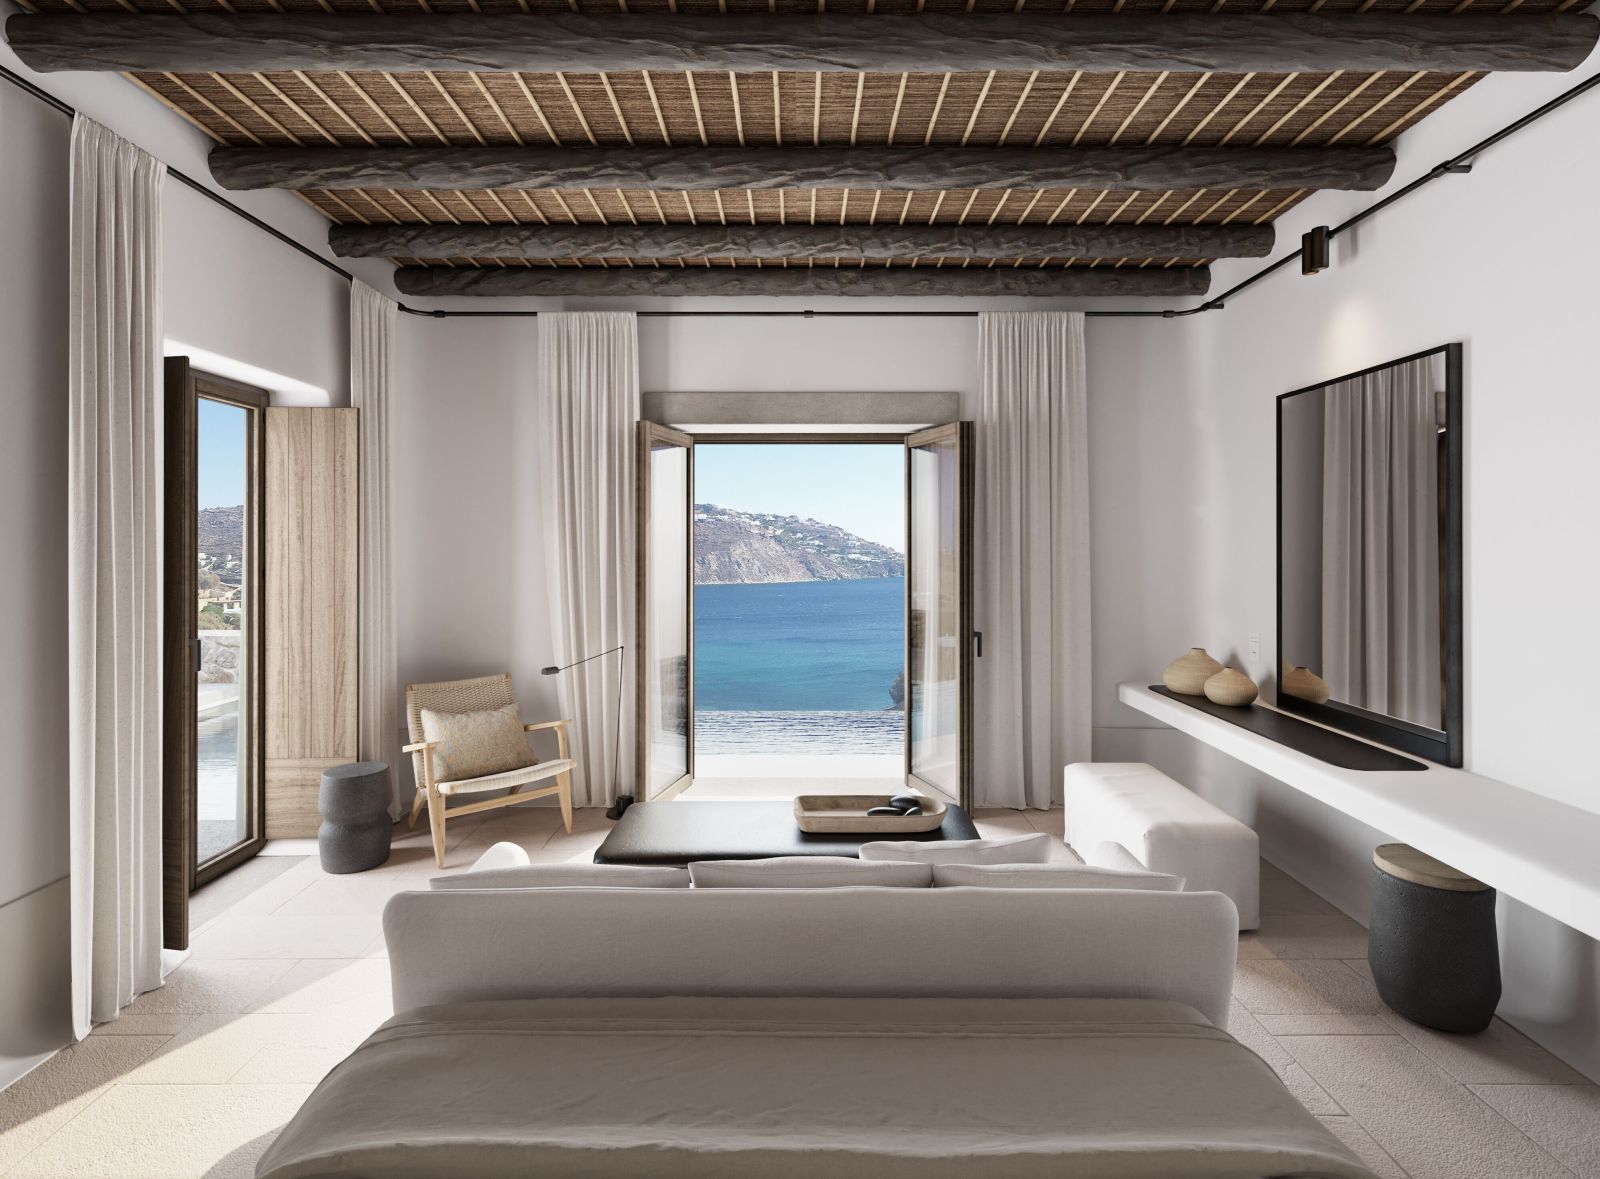 Suite and sea view at Kalesma Mykonos